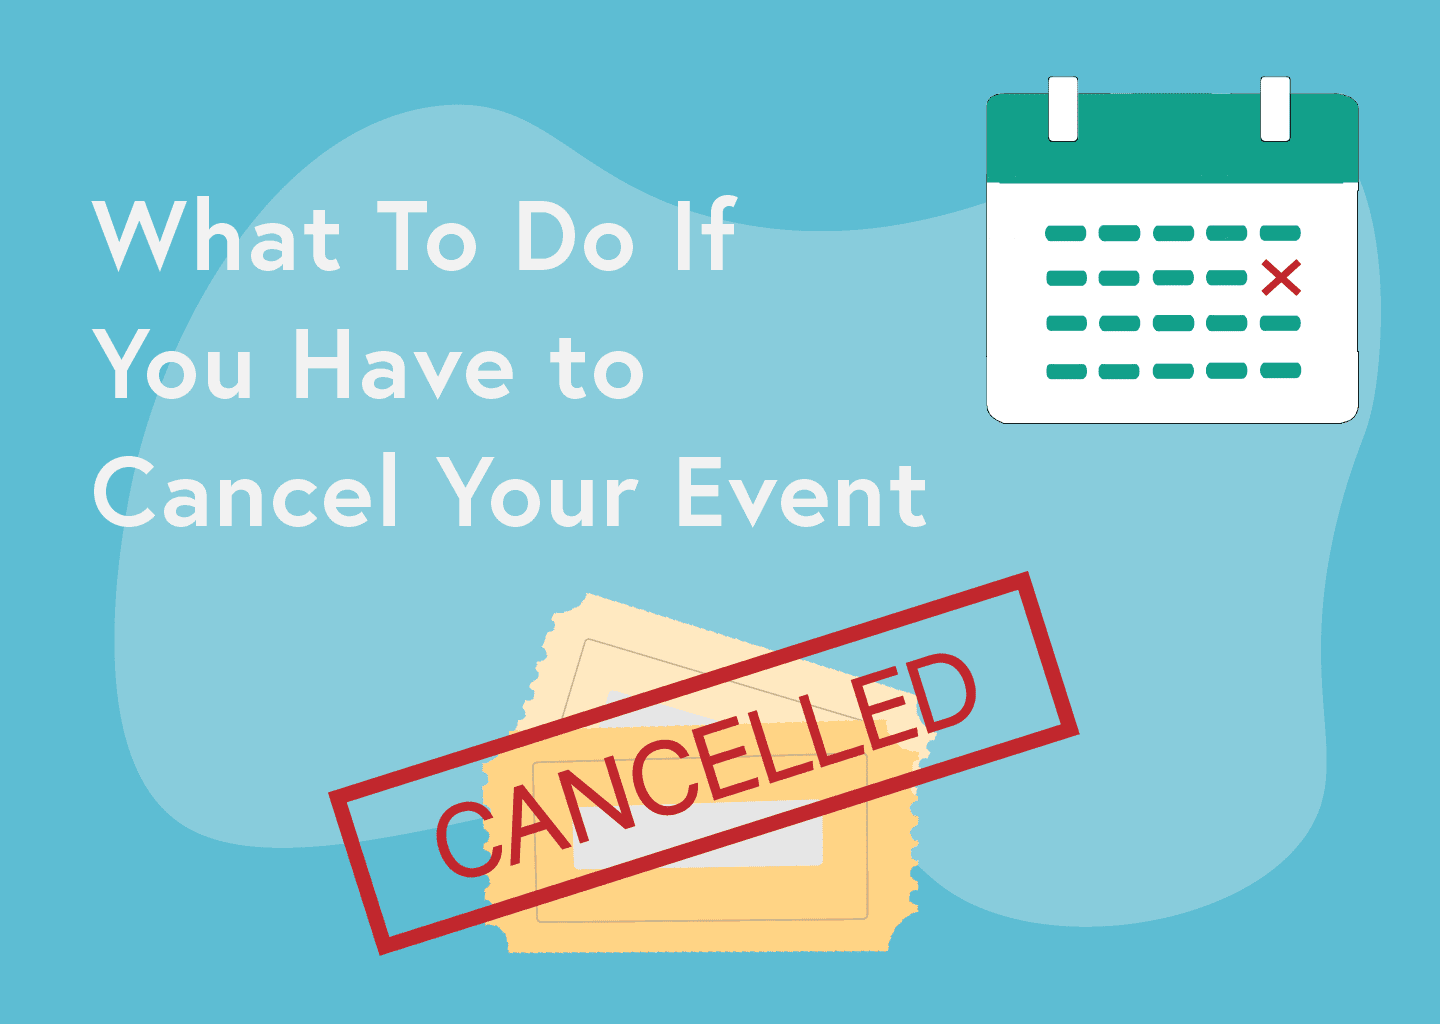 What To Do If You Have to Cancel Your Event